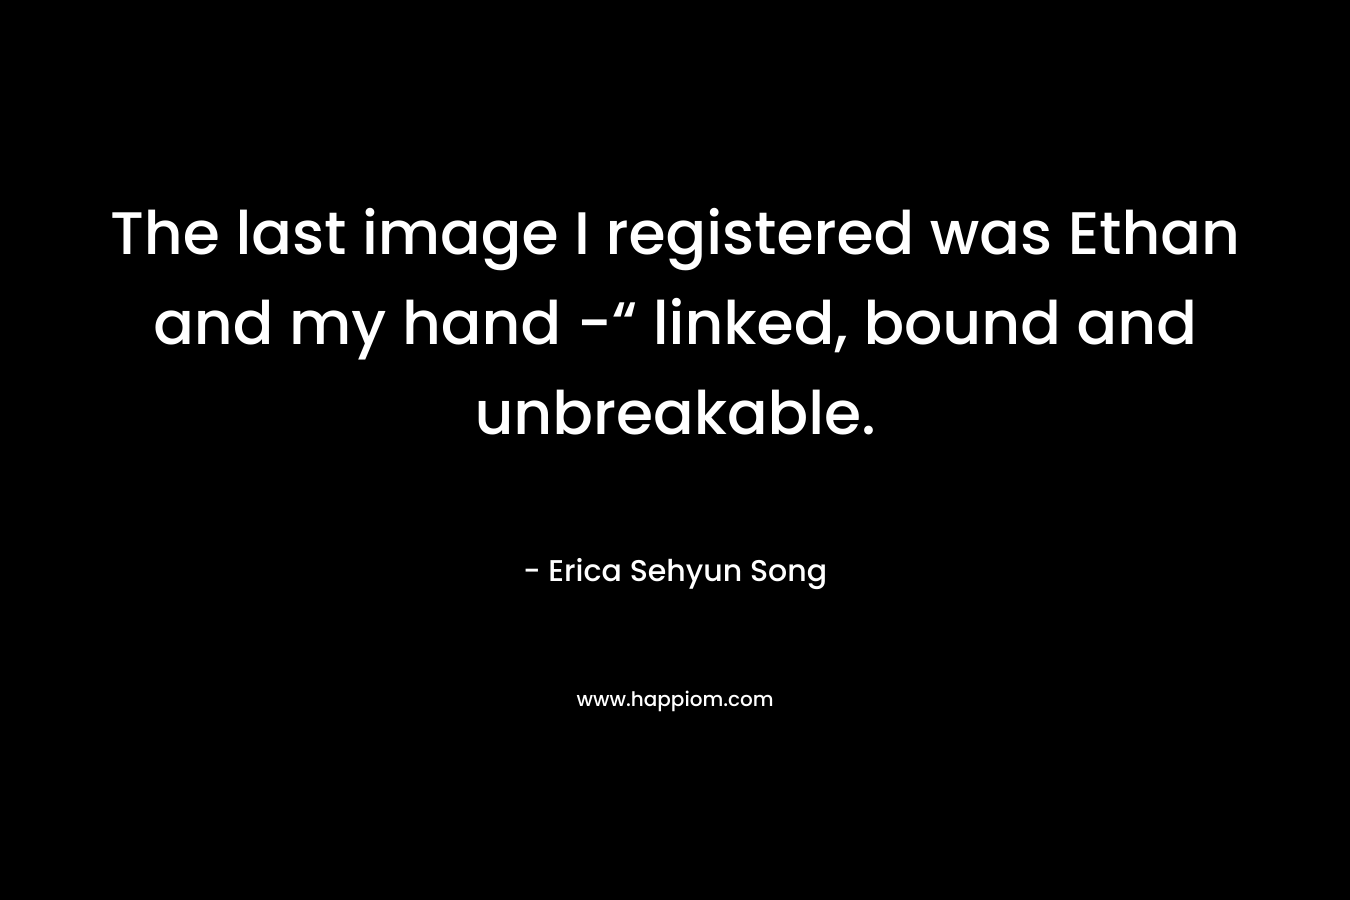 The last image I registered was Ethan and my hand -“ linked, bound and unbreakable. – Erica Sehyun Song